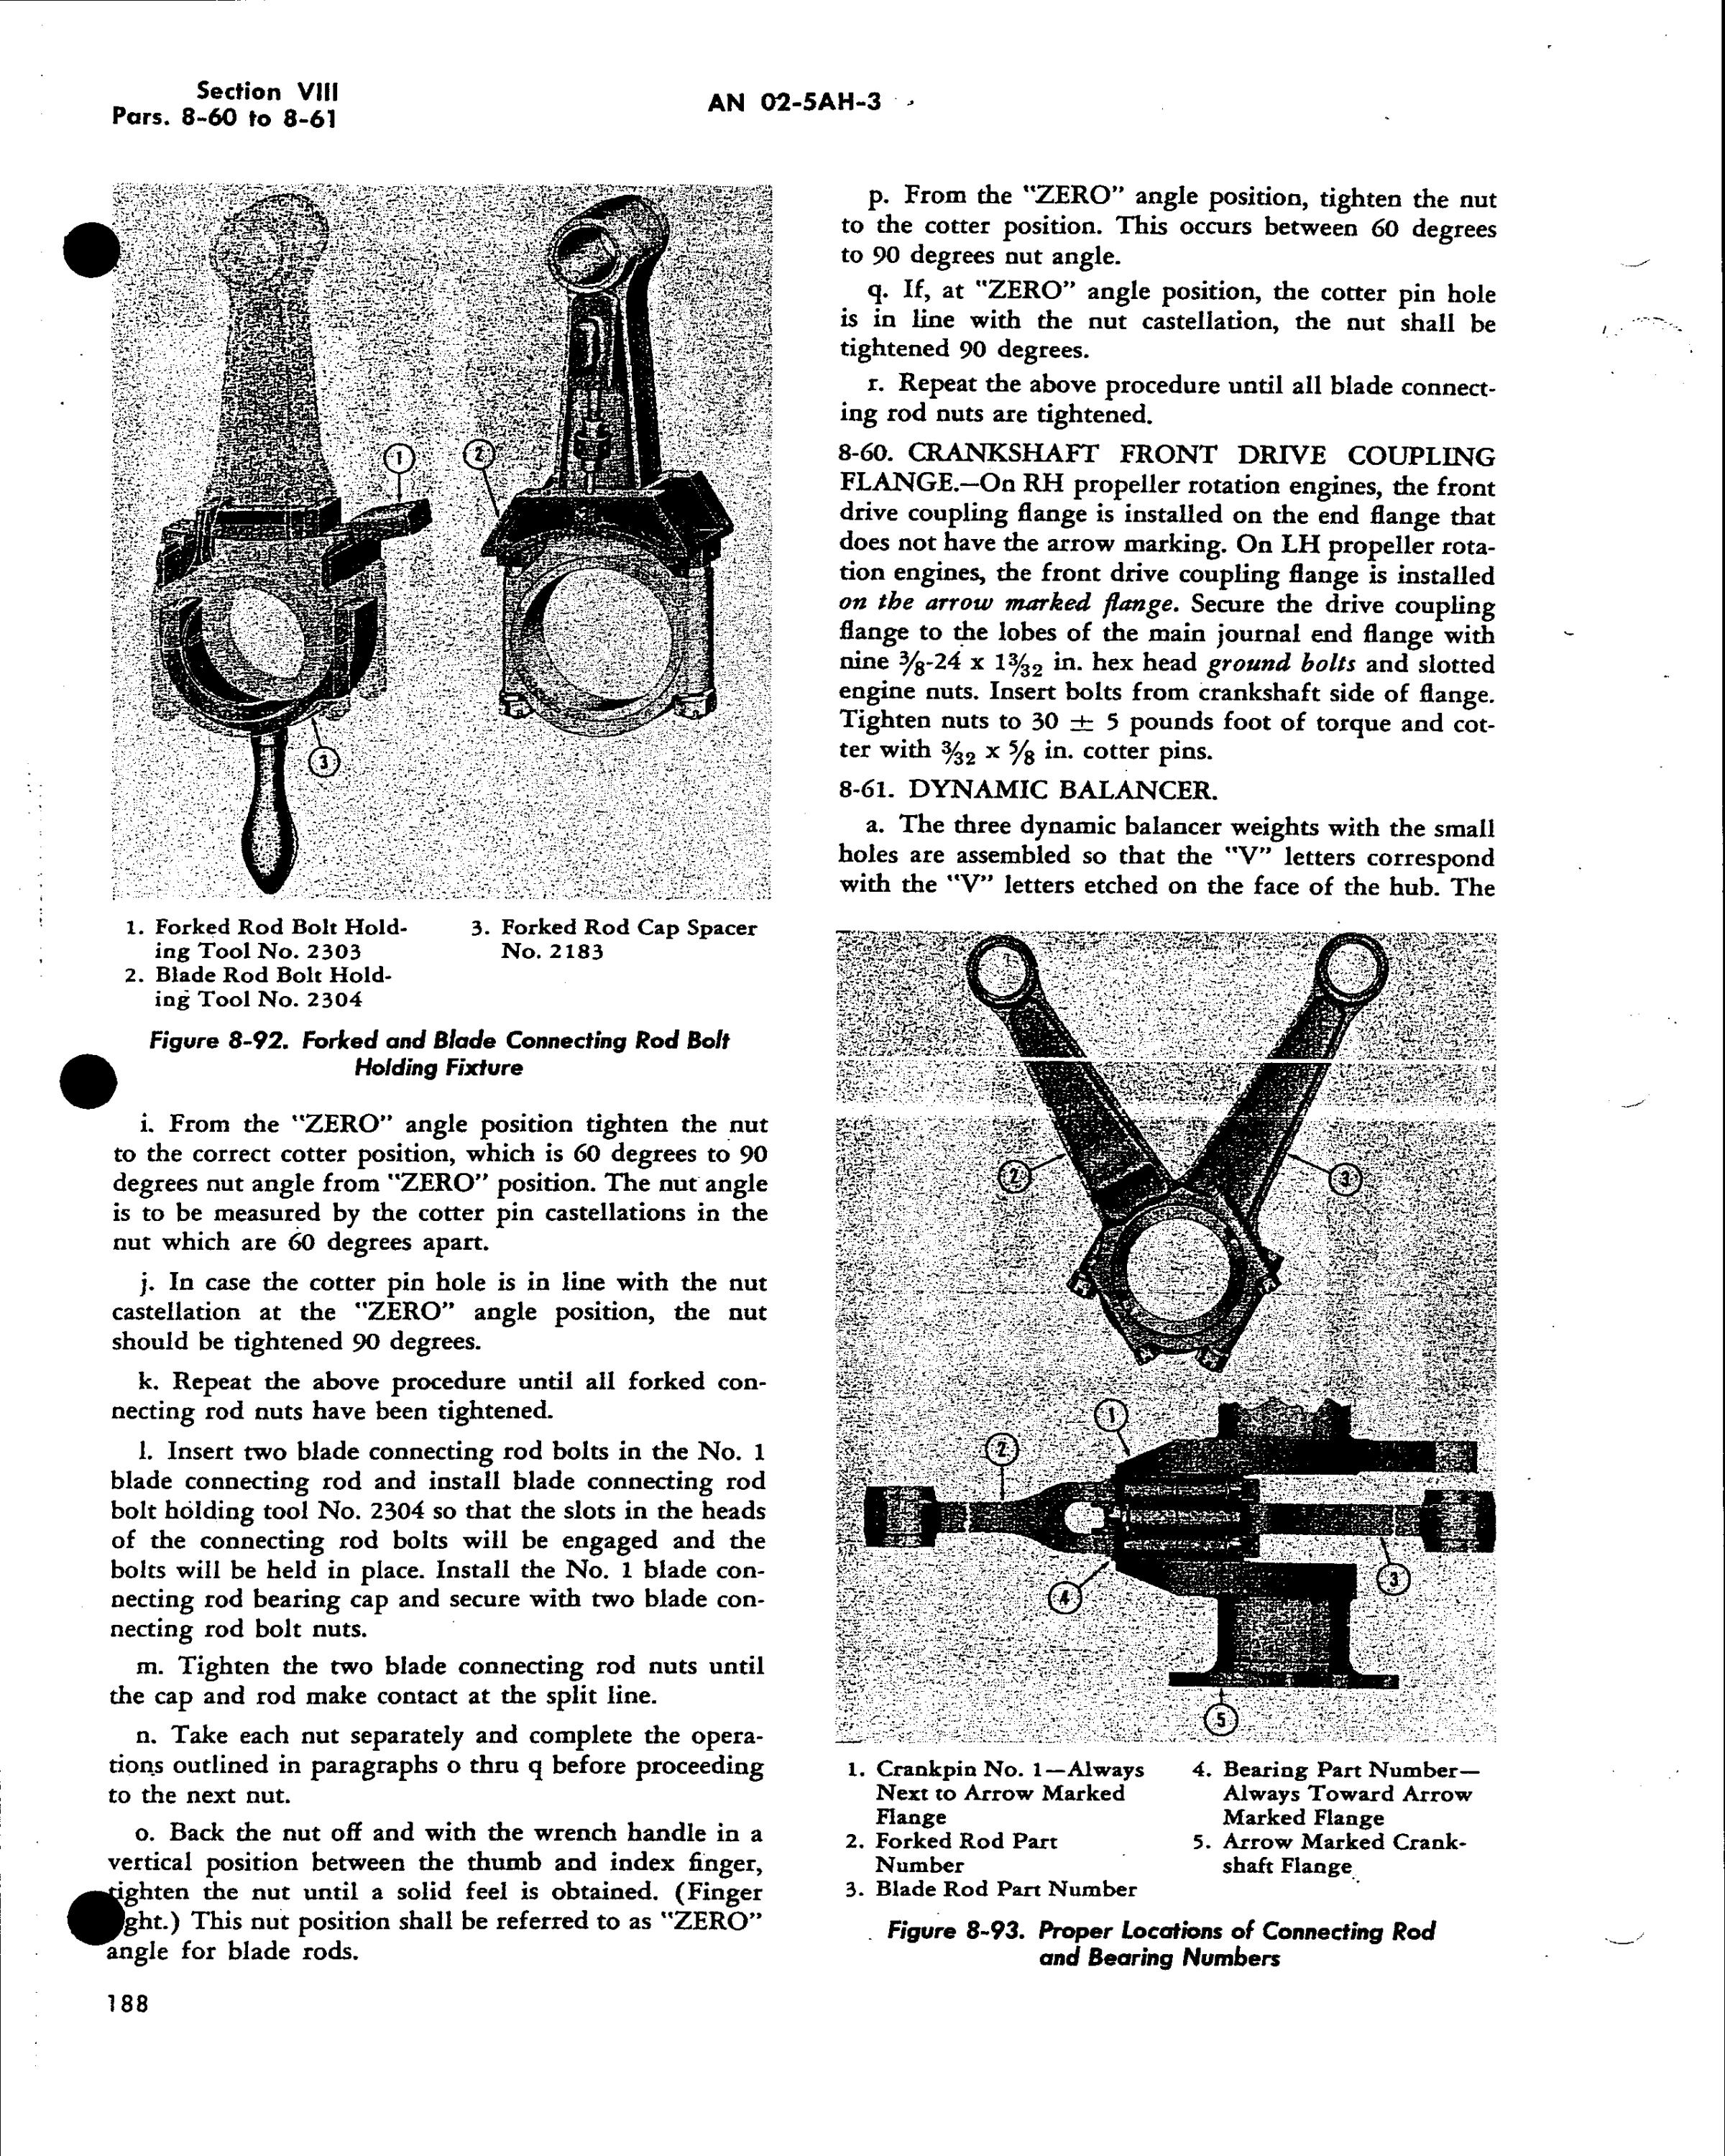 Sample page 5 from AirCorps Library document: Crankshaft Excerpt: From V-1710-143, -145 Overhaul Instructions 